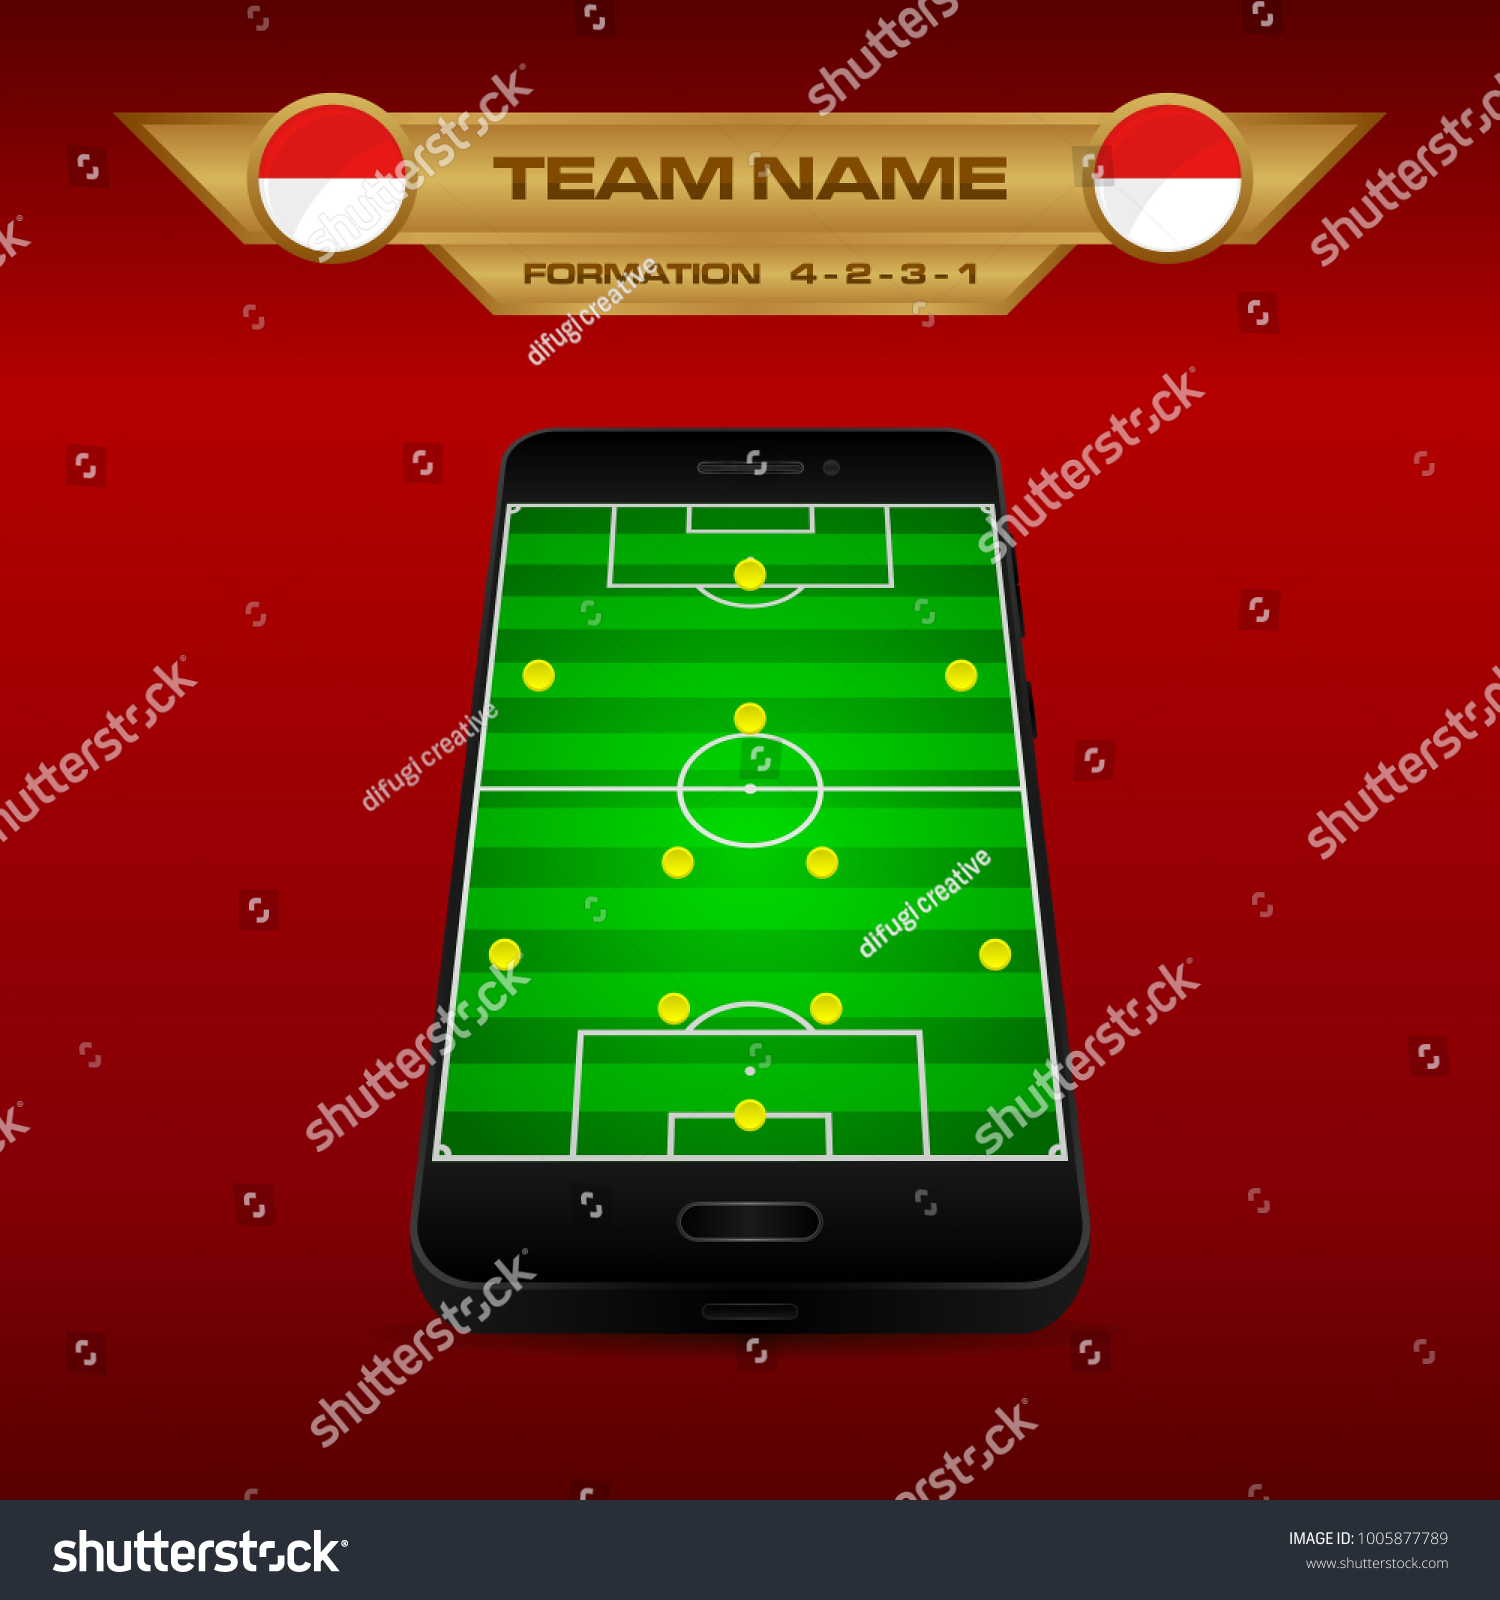 Football Soccer Formation Strategy Template Perspective Stock Vector Royalty Free